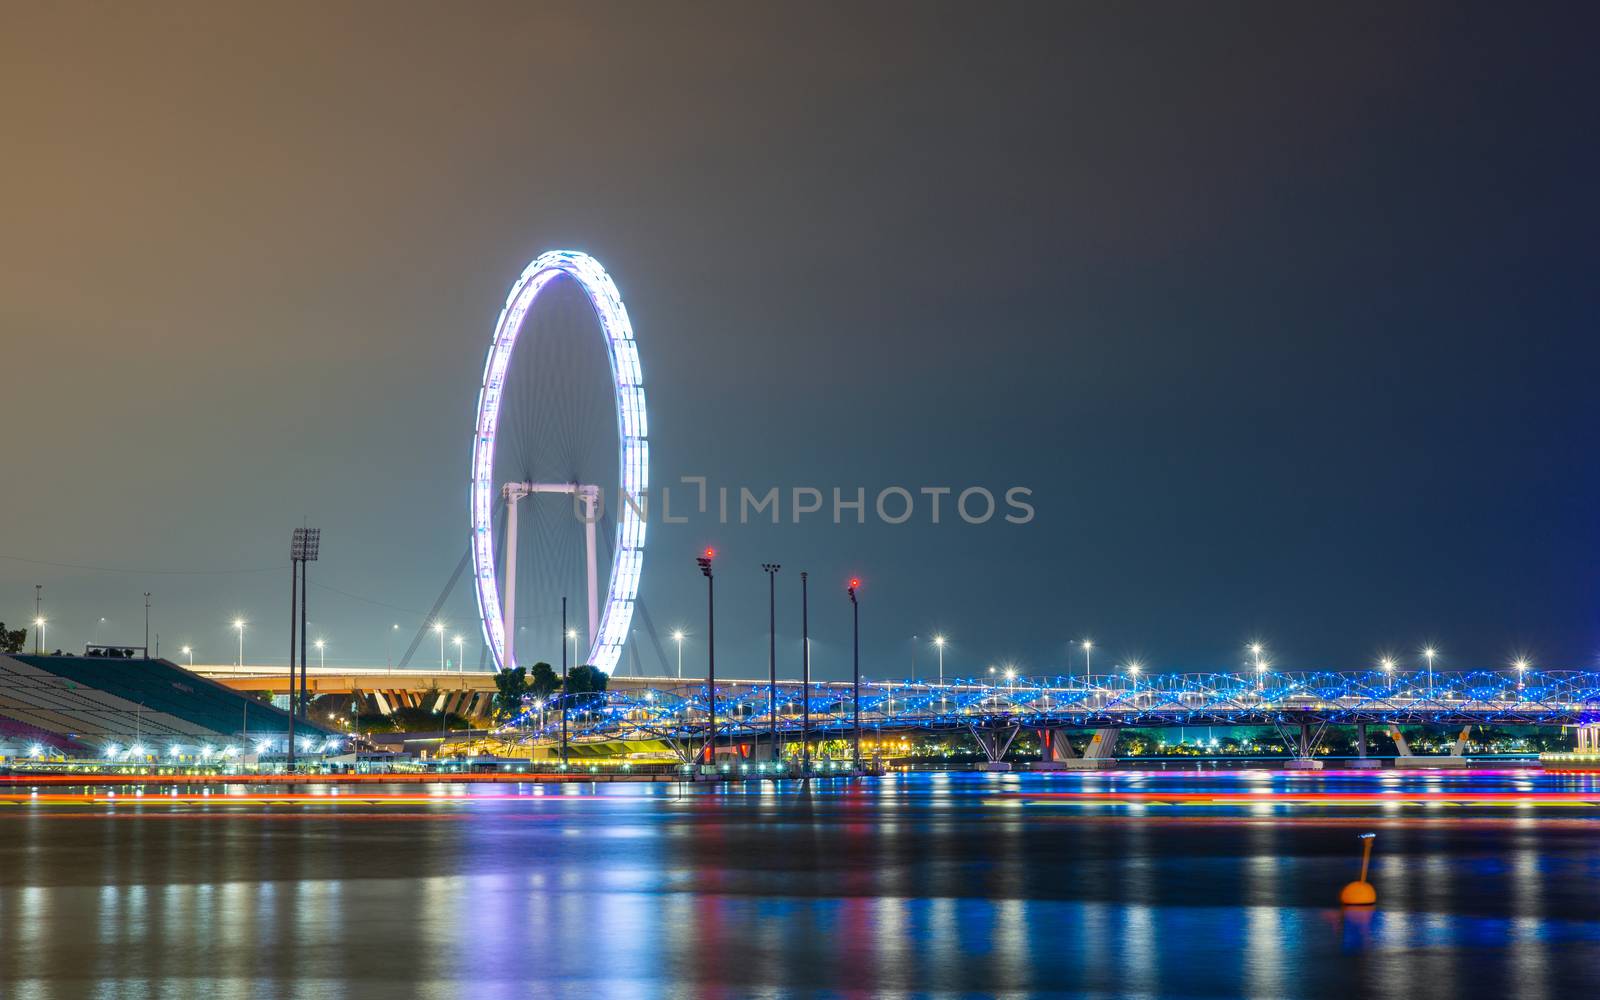 The Singapore Flyer and Helix Bridge at night, colorful lightrails created by boats.